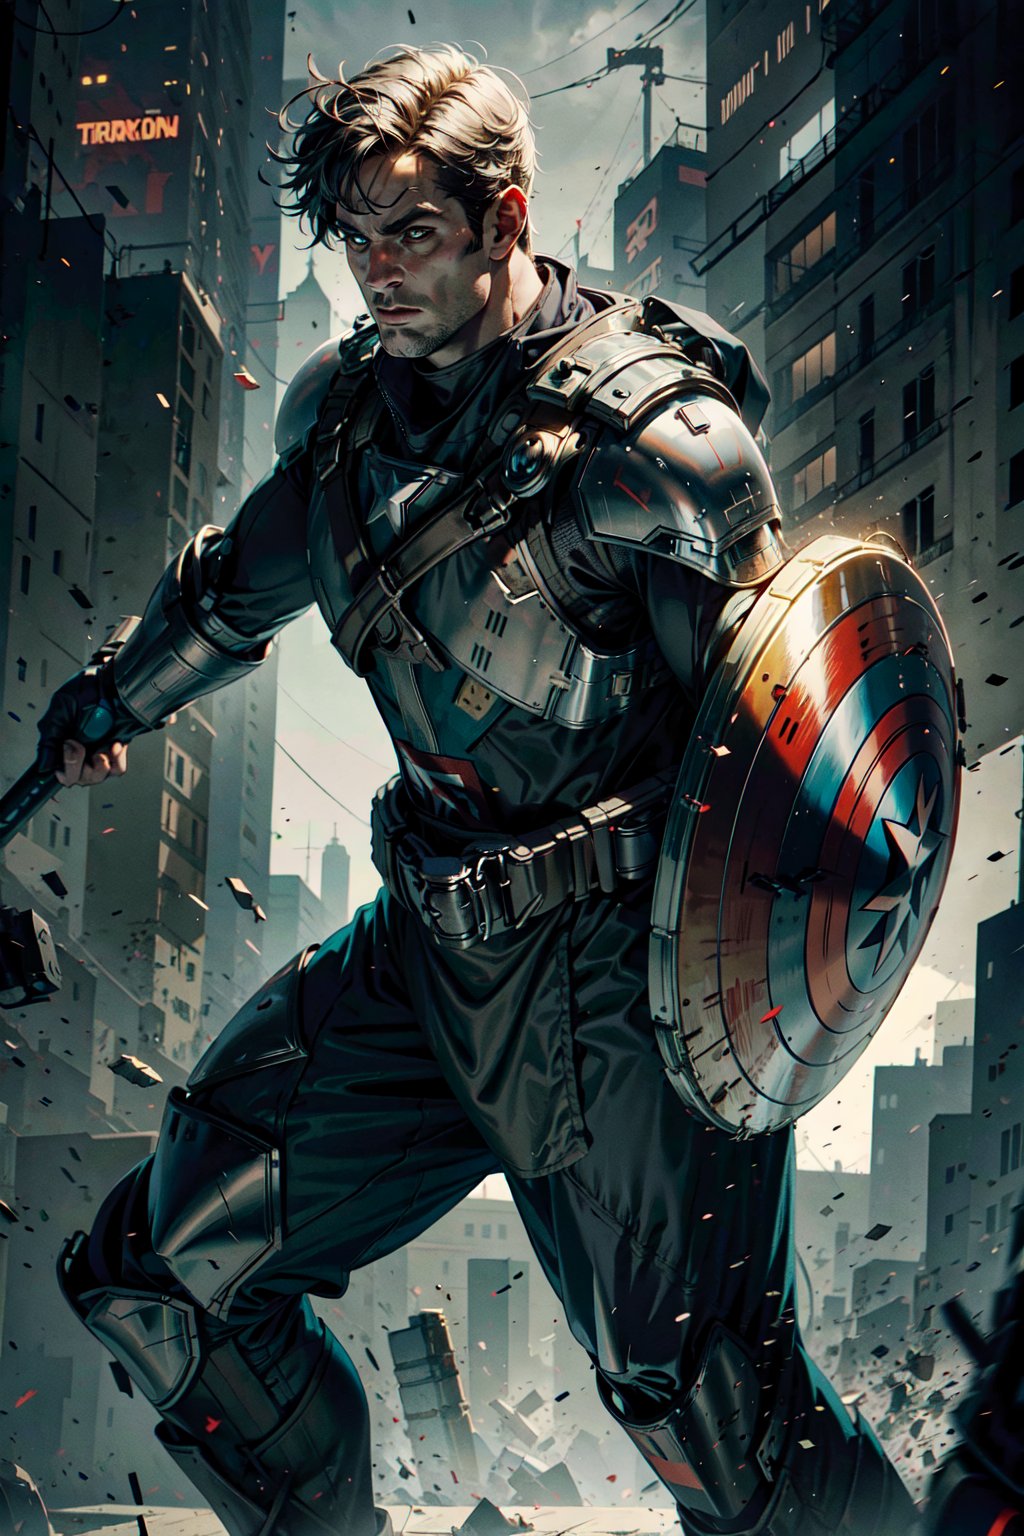 Captain America, cyberpunk, armour suit, holding shield on left hand, holding Thor hammer on right hand, battle pose